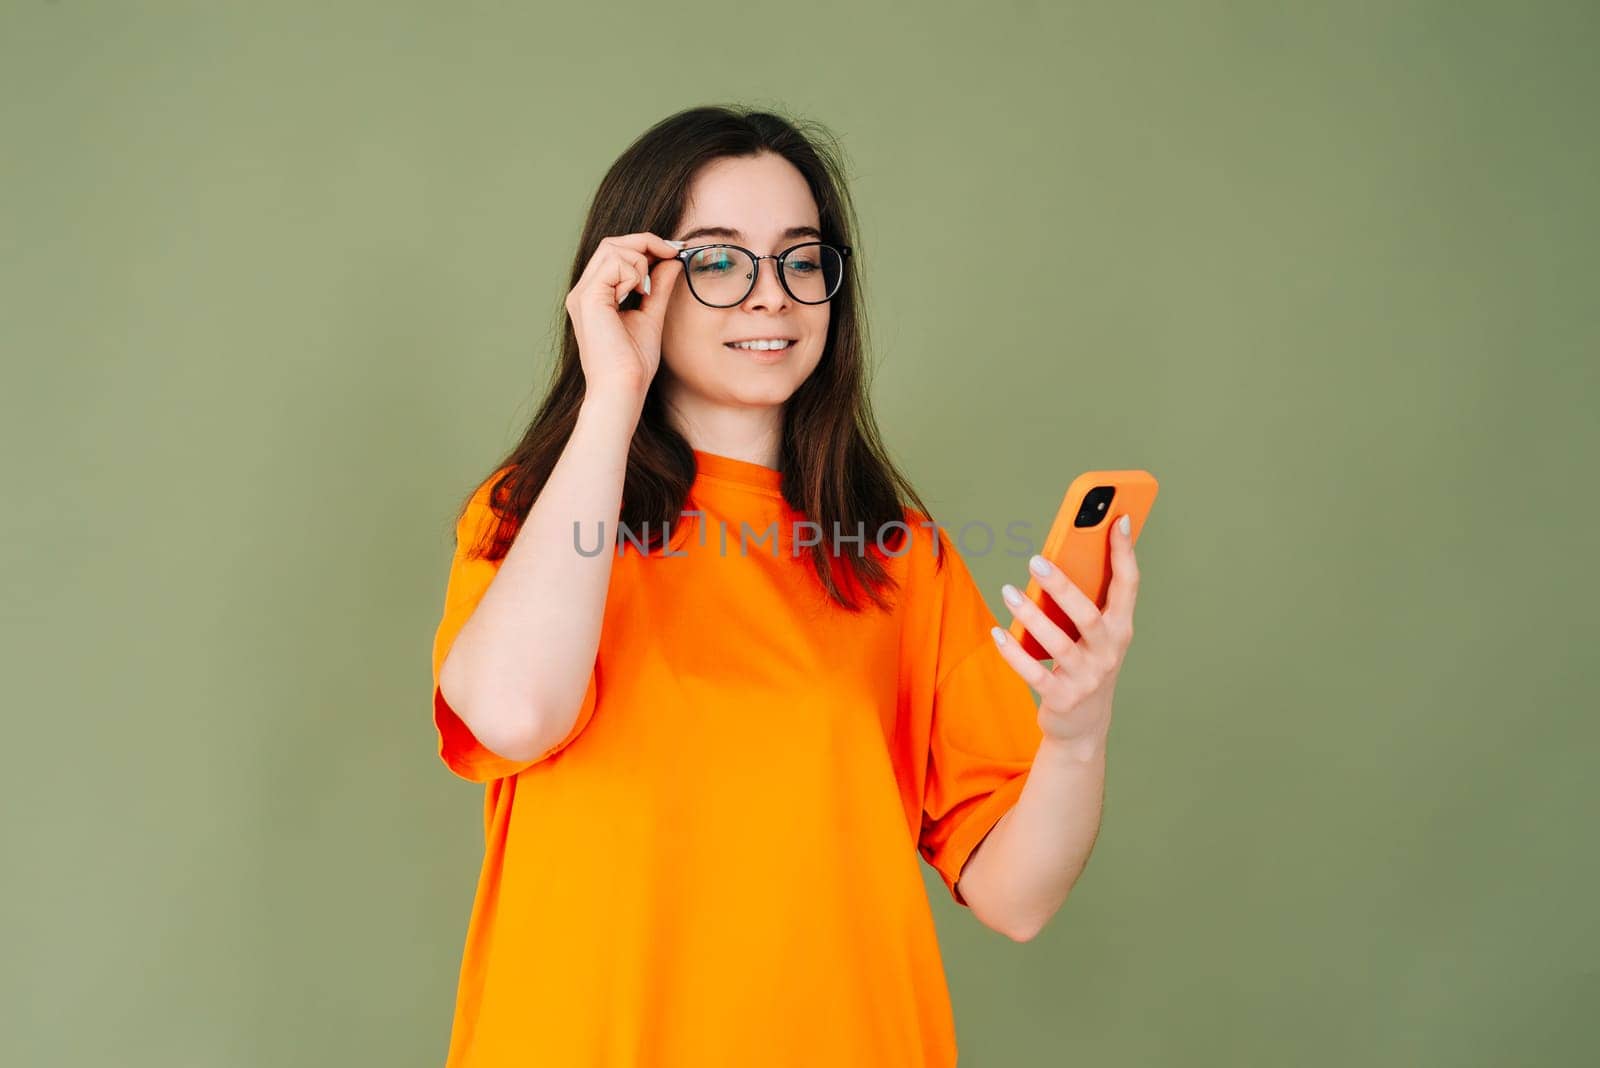 Picture of a cheerful young woman in an orange T-shirt using a modern smartphone in empty green space - technology and communication concept. isolated on green background with copy space for text by ViShark